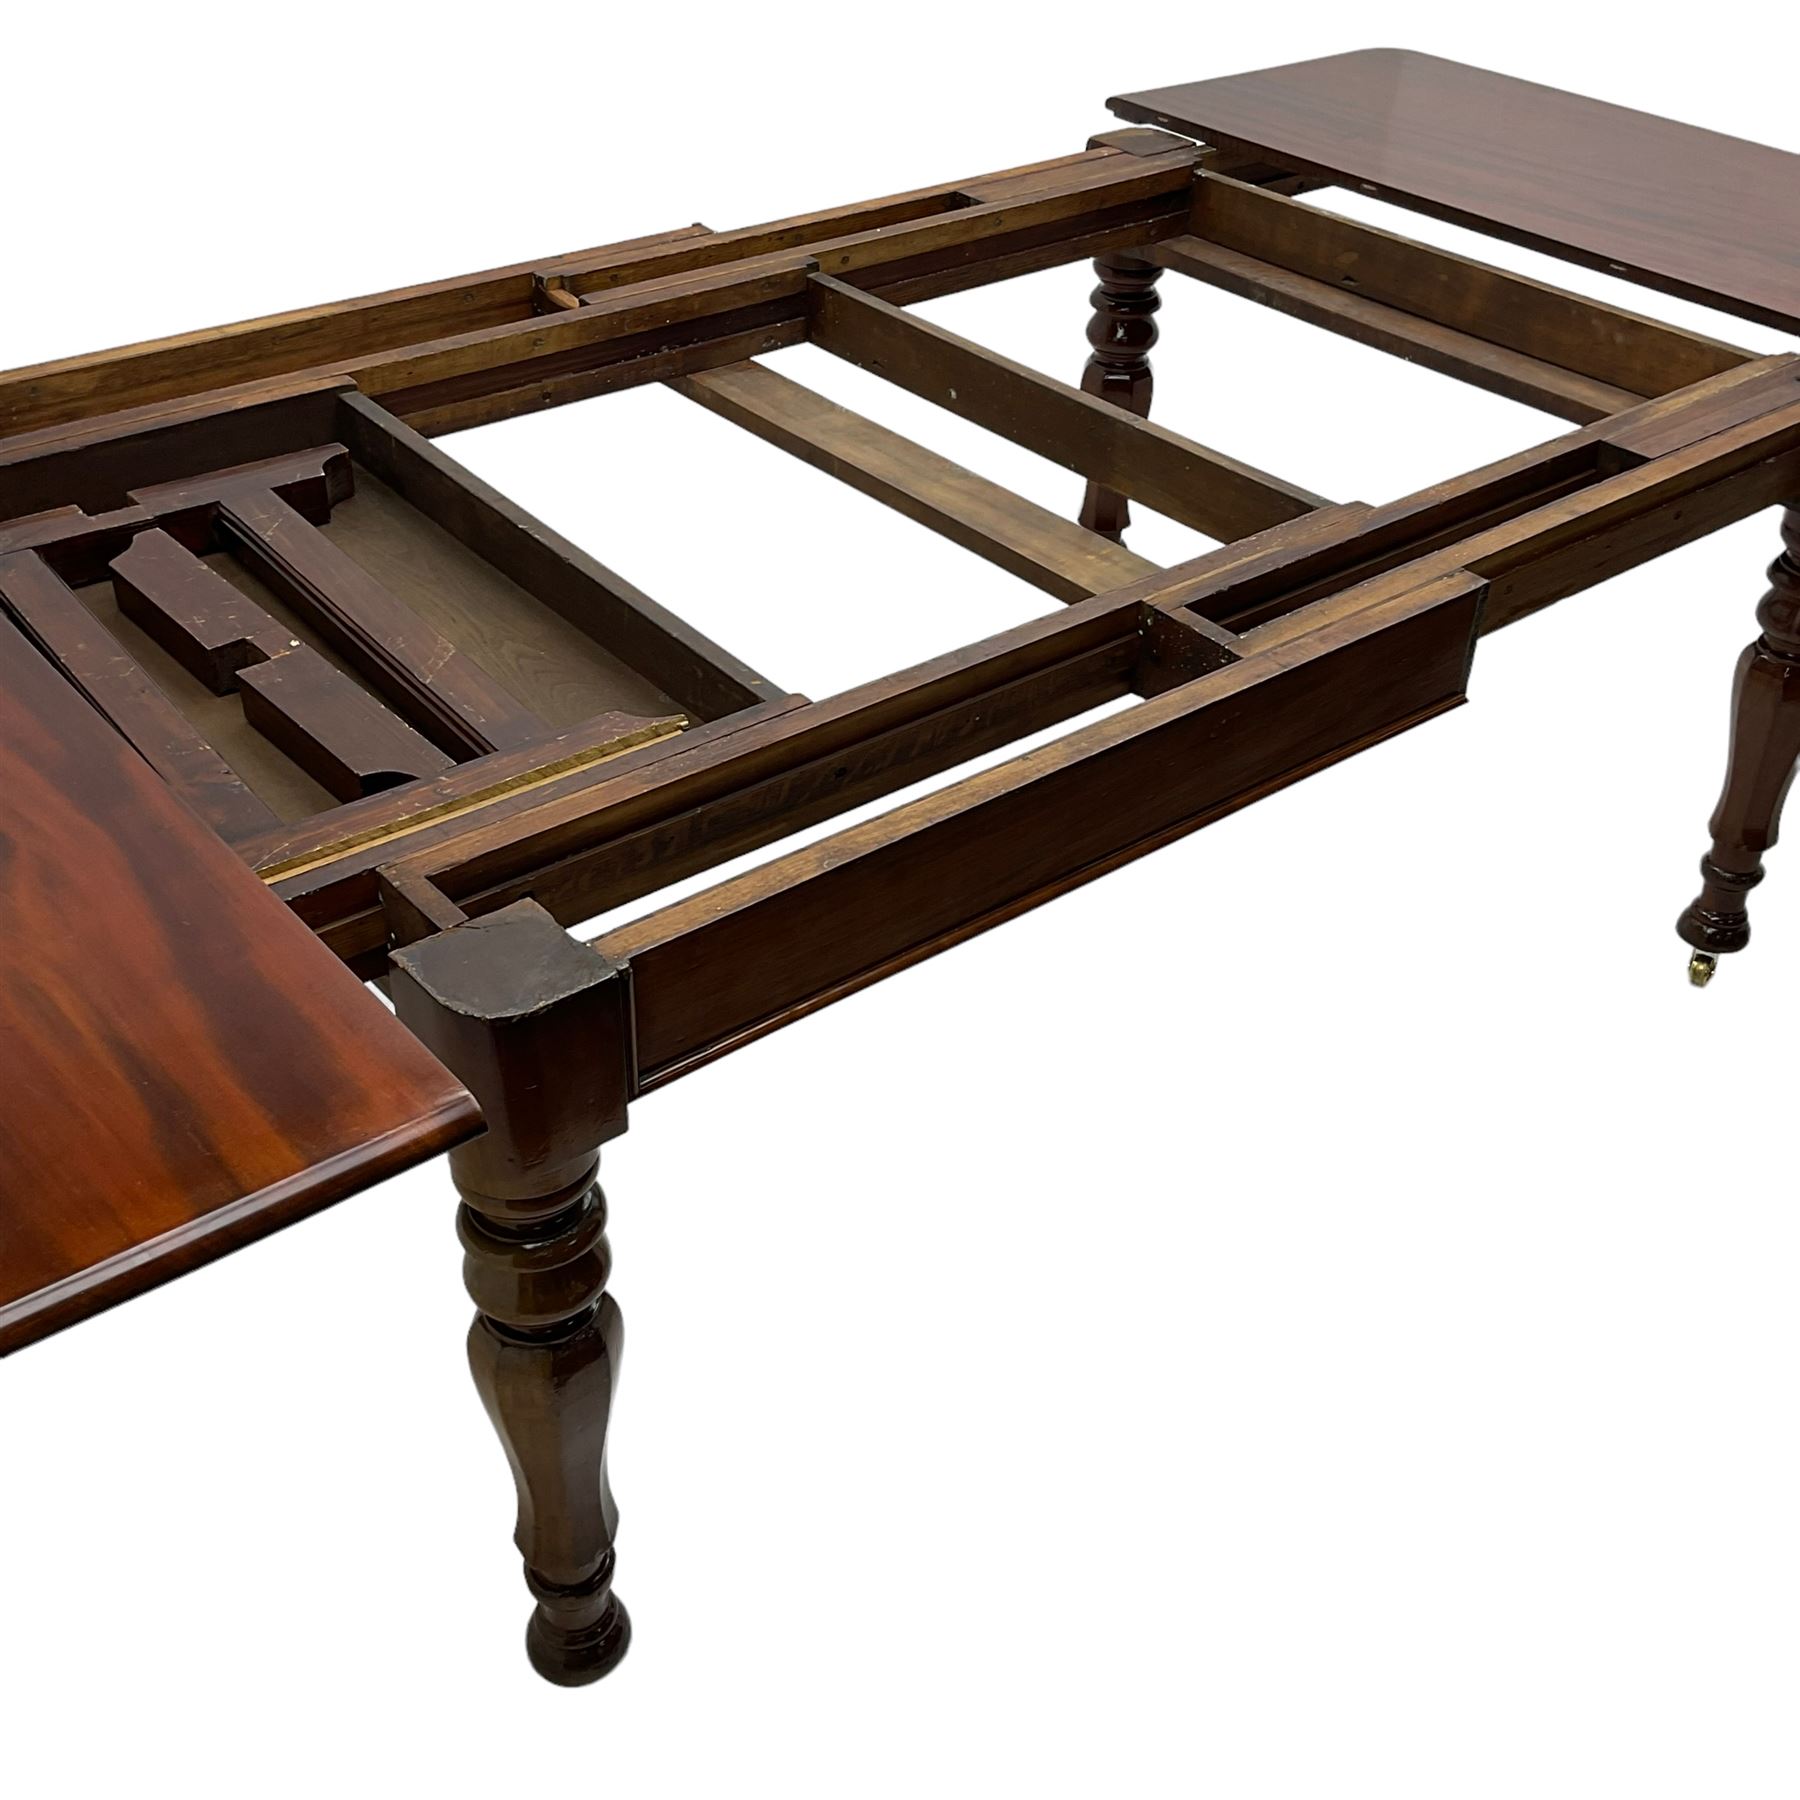 19th century mahogany extending dining table with three additional leaves - Image 13 of 15